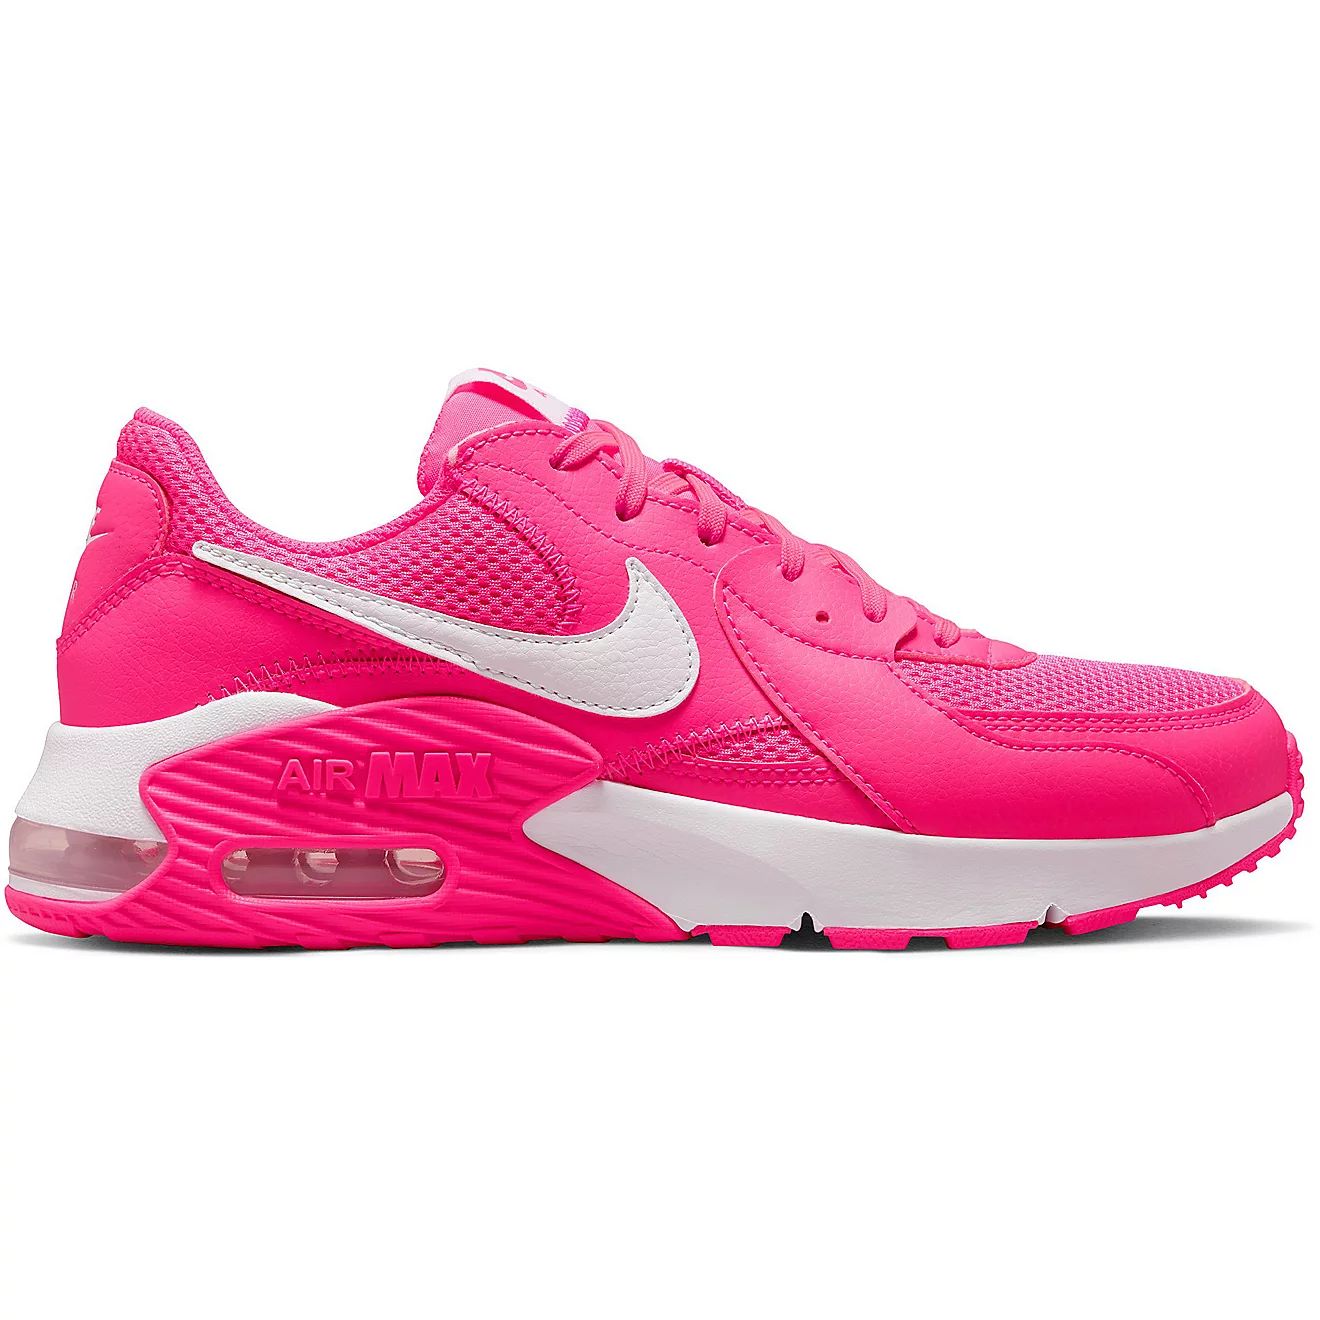 Nike Women's Air Max Excee Shoes | Free Shipping at Academy | Academy Sports + Outdoors